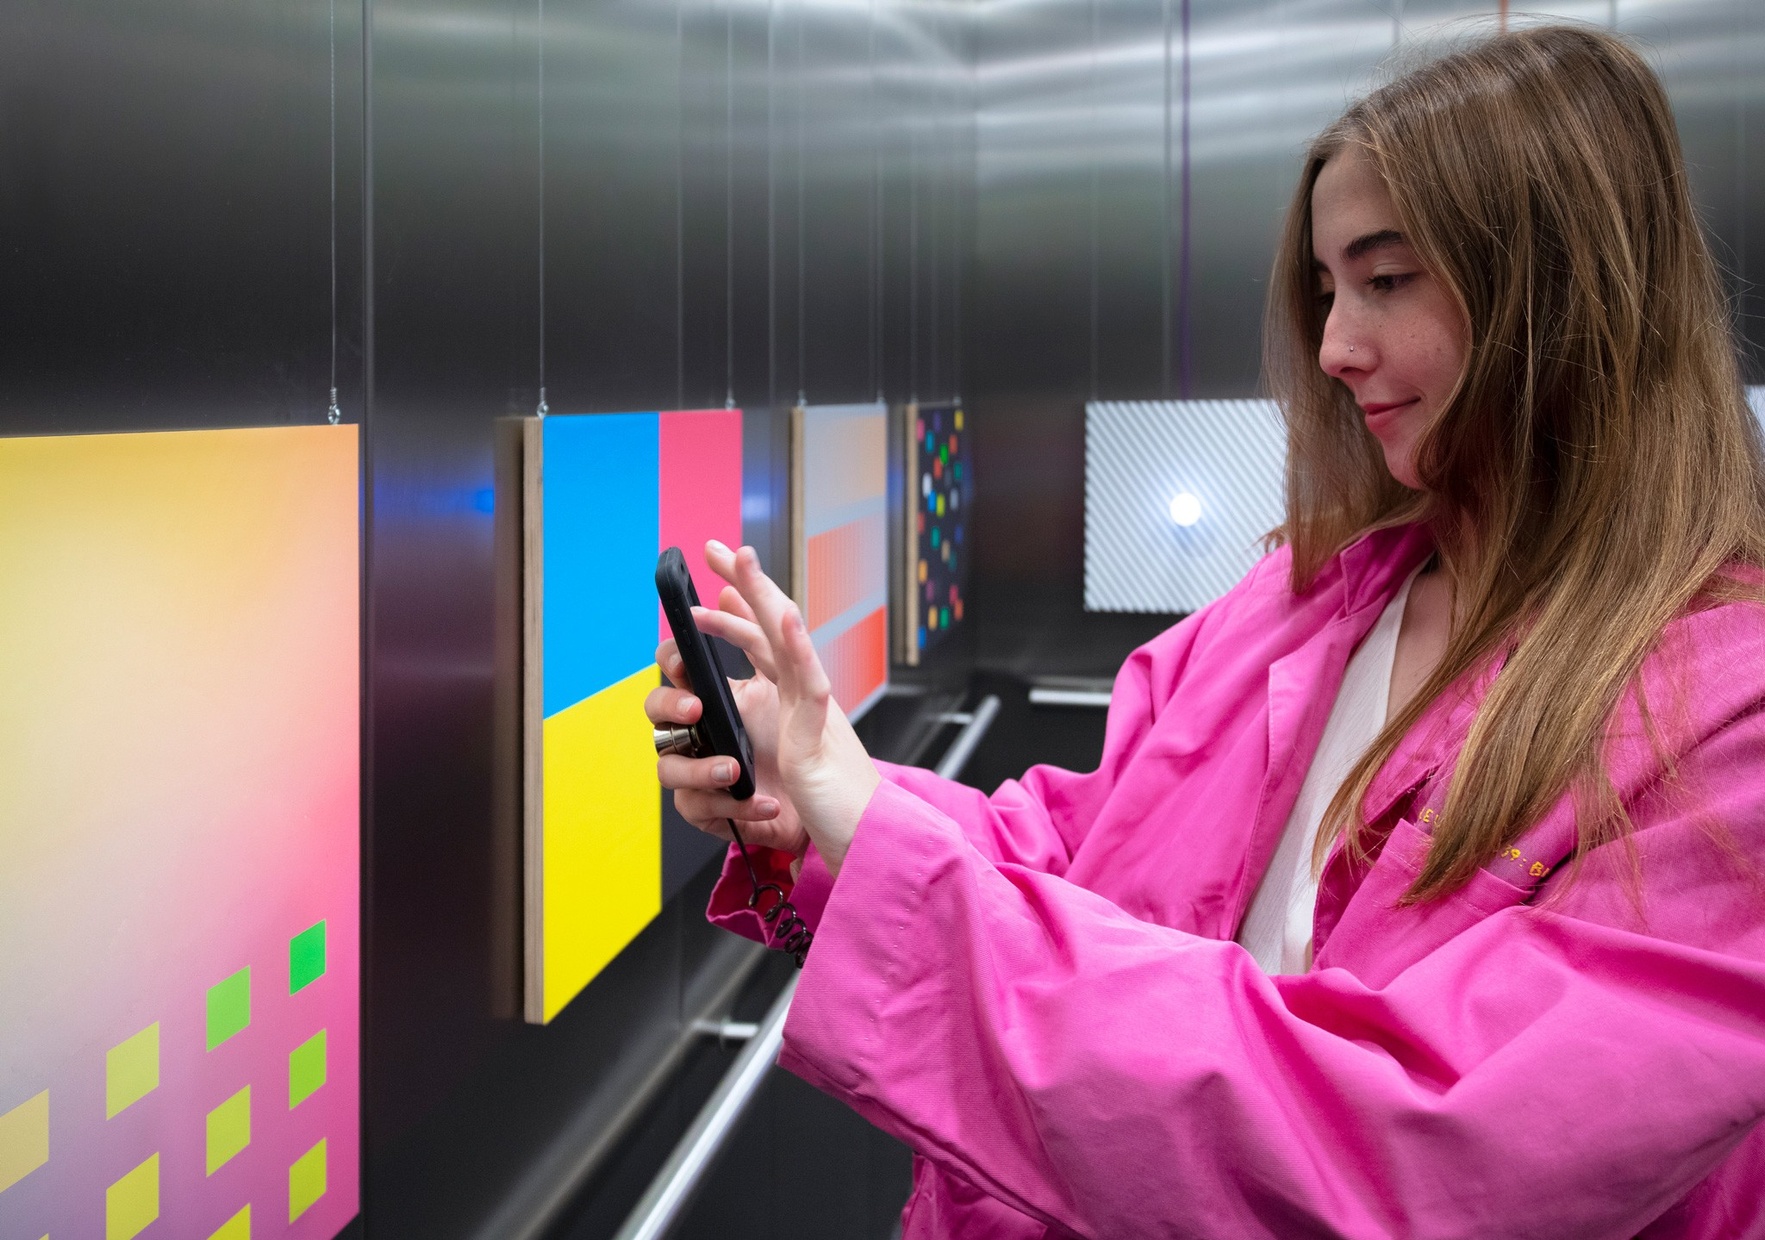 A young, light-skinned female in a bright pink coat is pointing an iphone at a colorful square in an elevator.